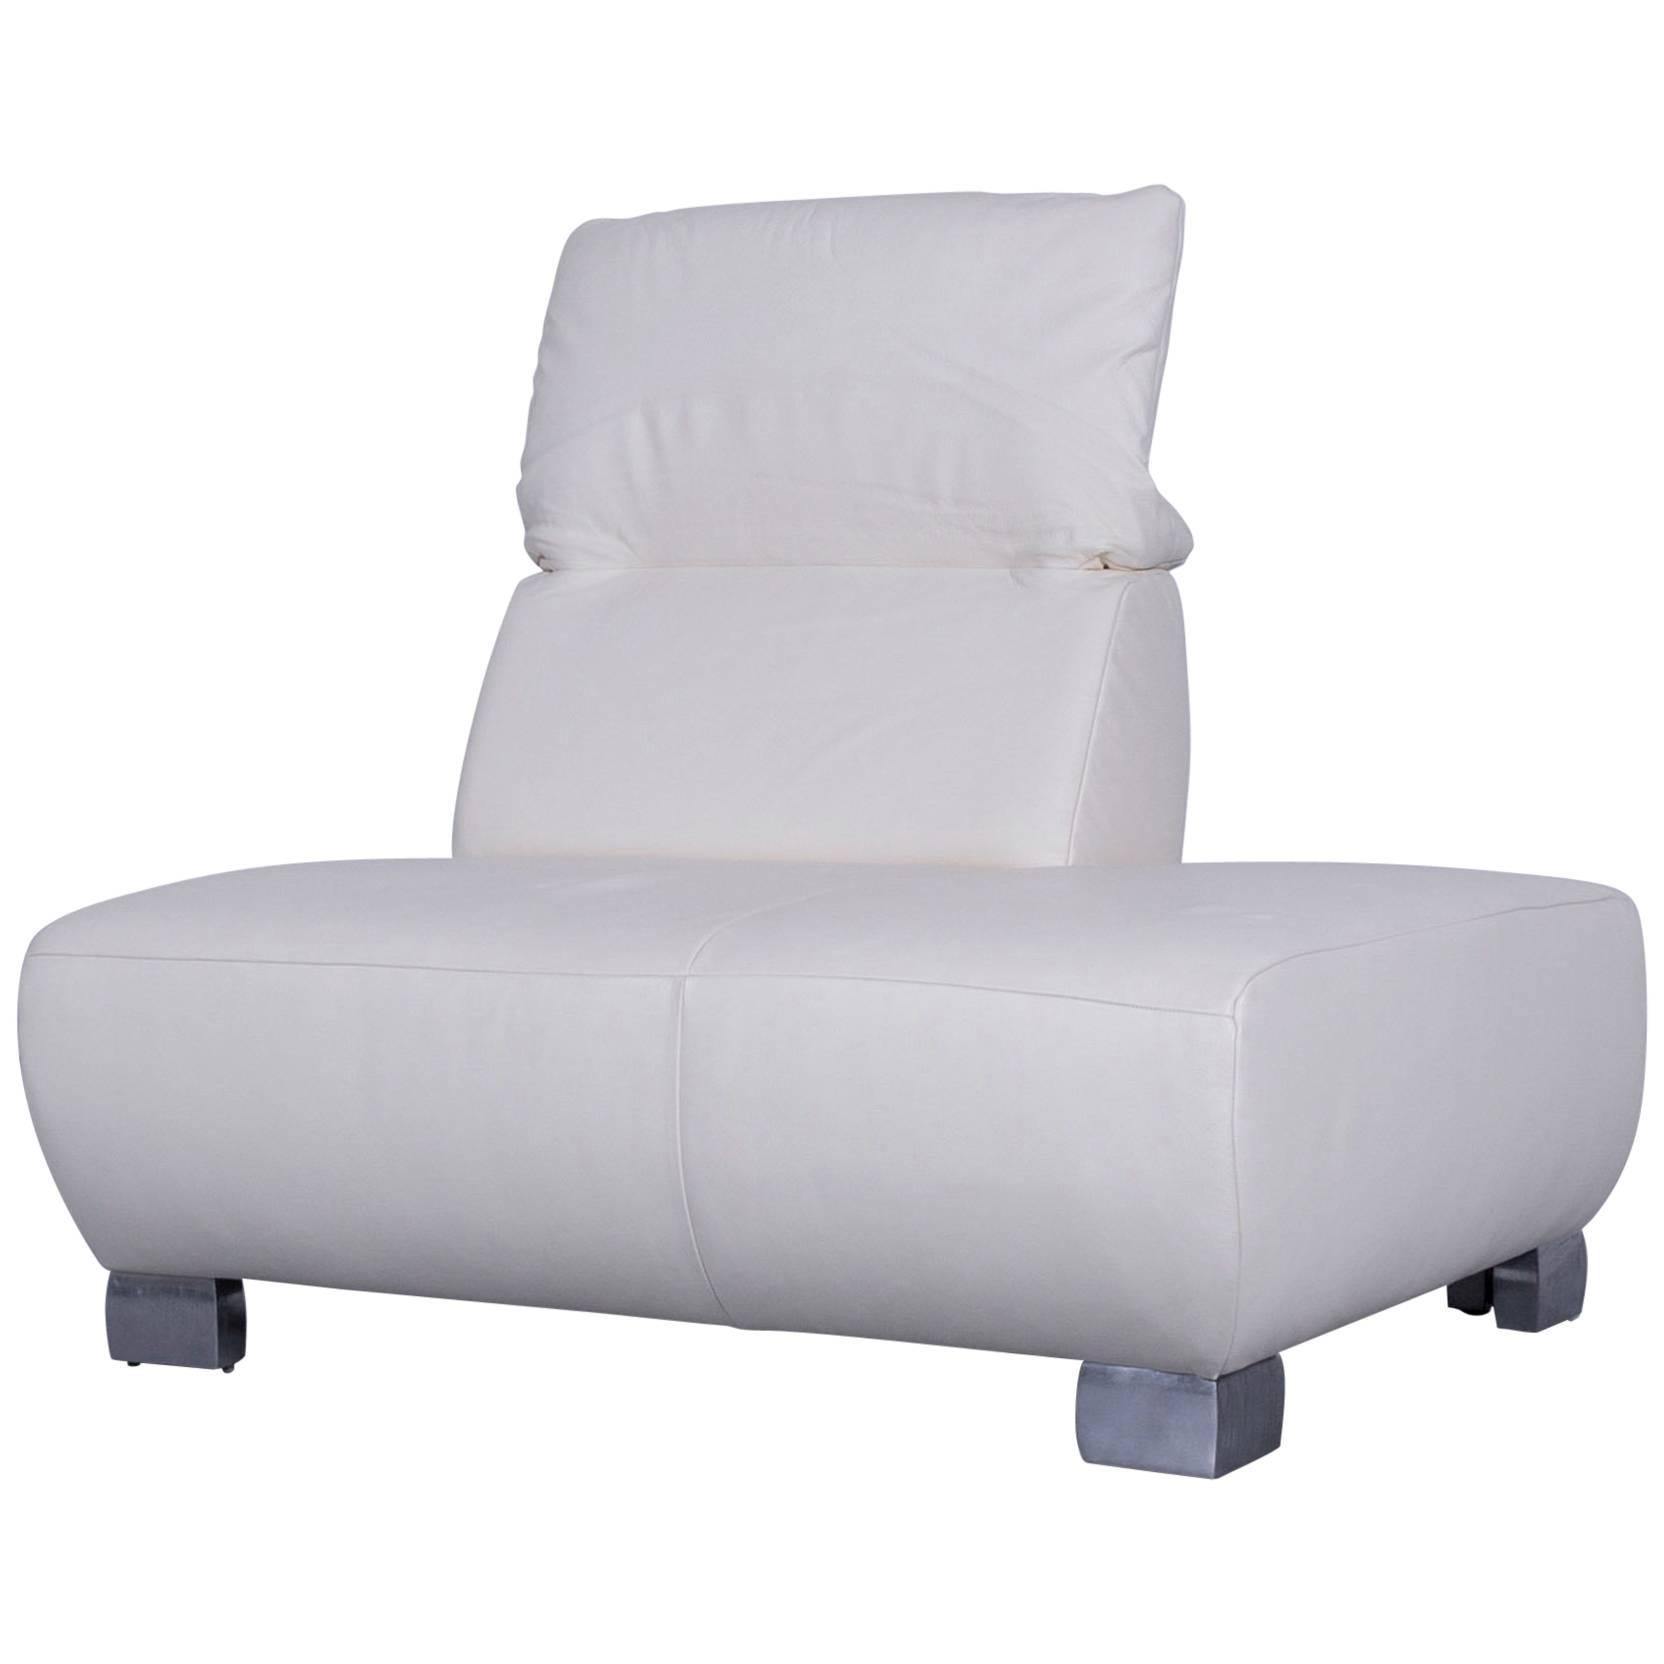 Koinor Volare Leather Recamiere Off-White One Seat